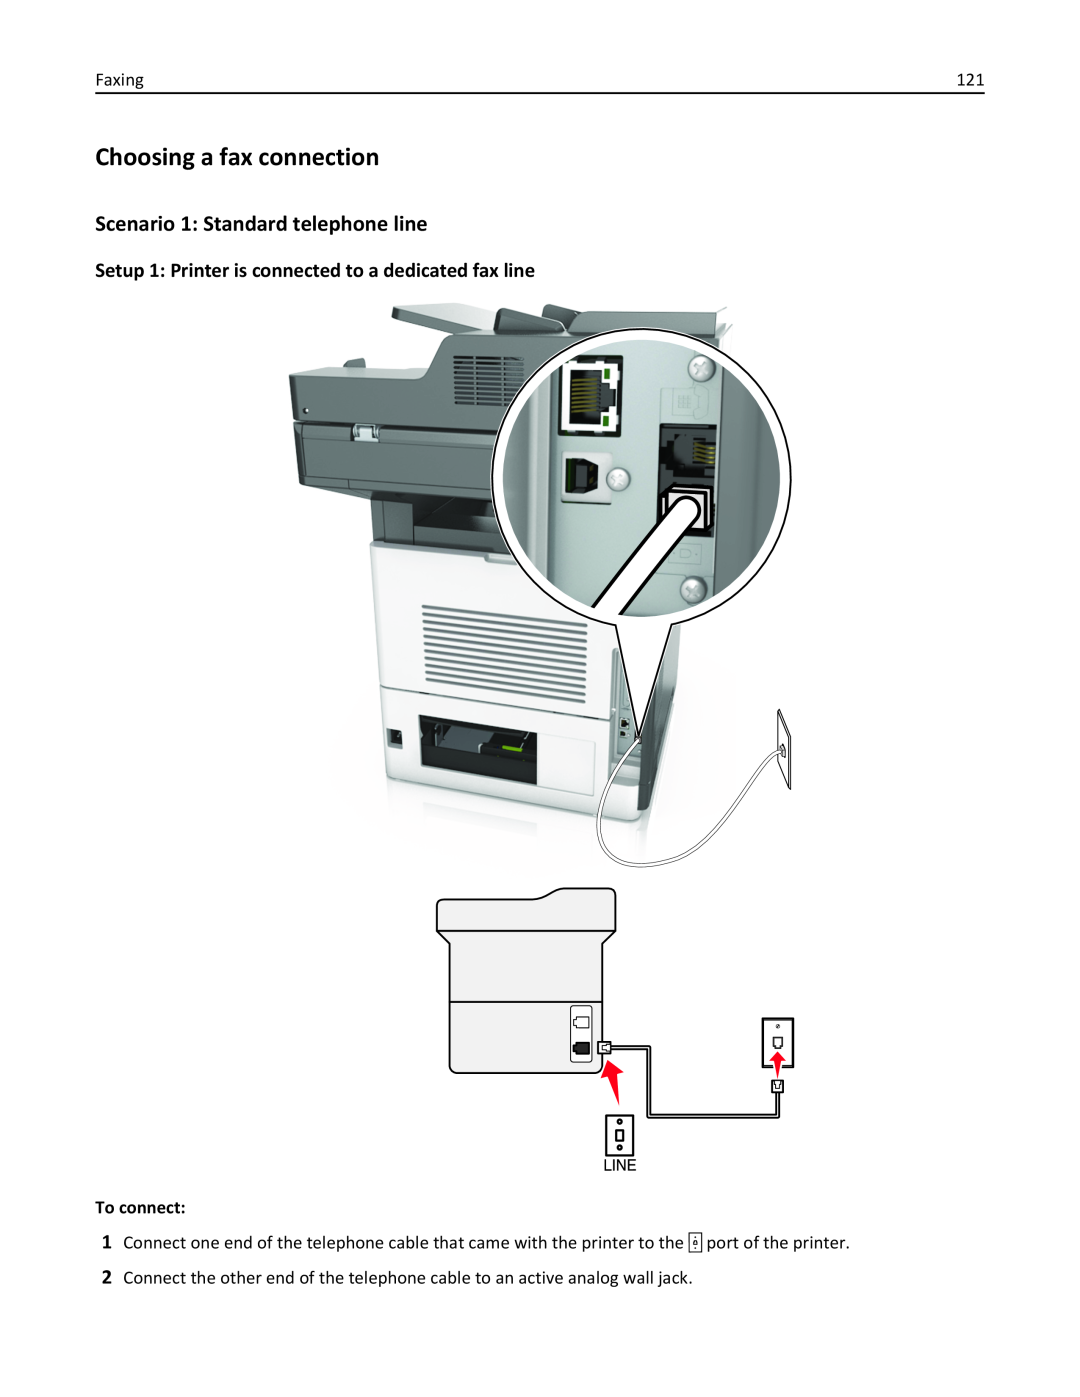 Lexmark MX710DHE, 24T7310, 237, 037 manual Choosing a fax connection, Scenario 1 Standard telephone line, To connect 